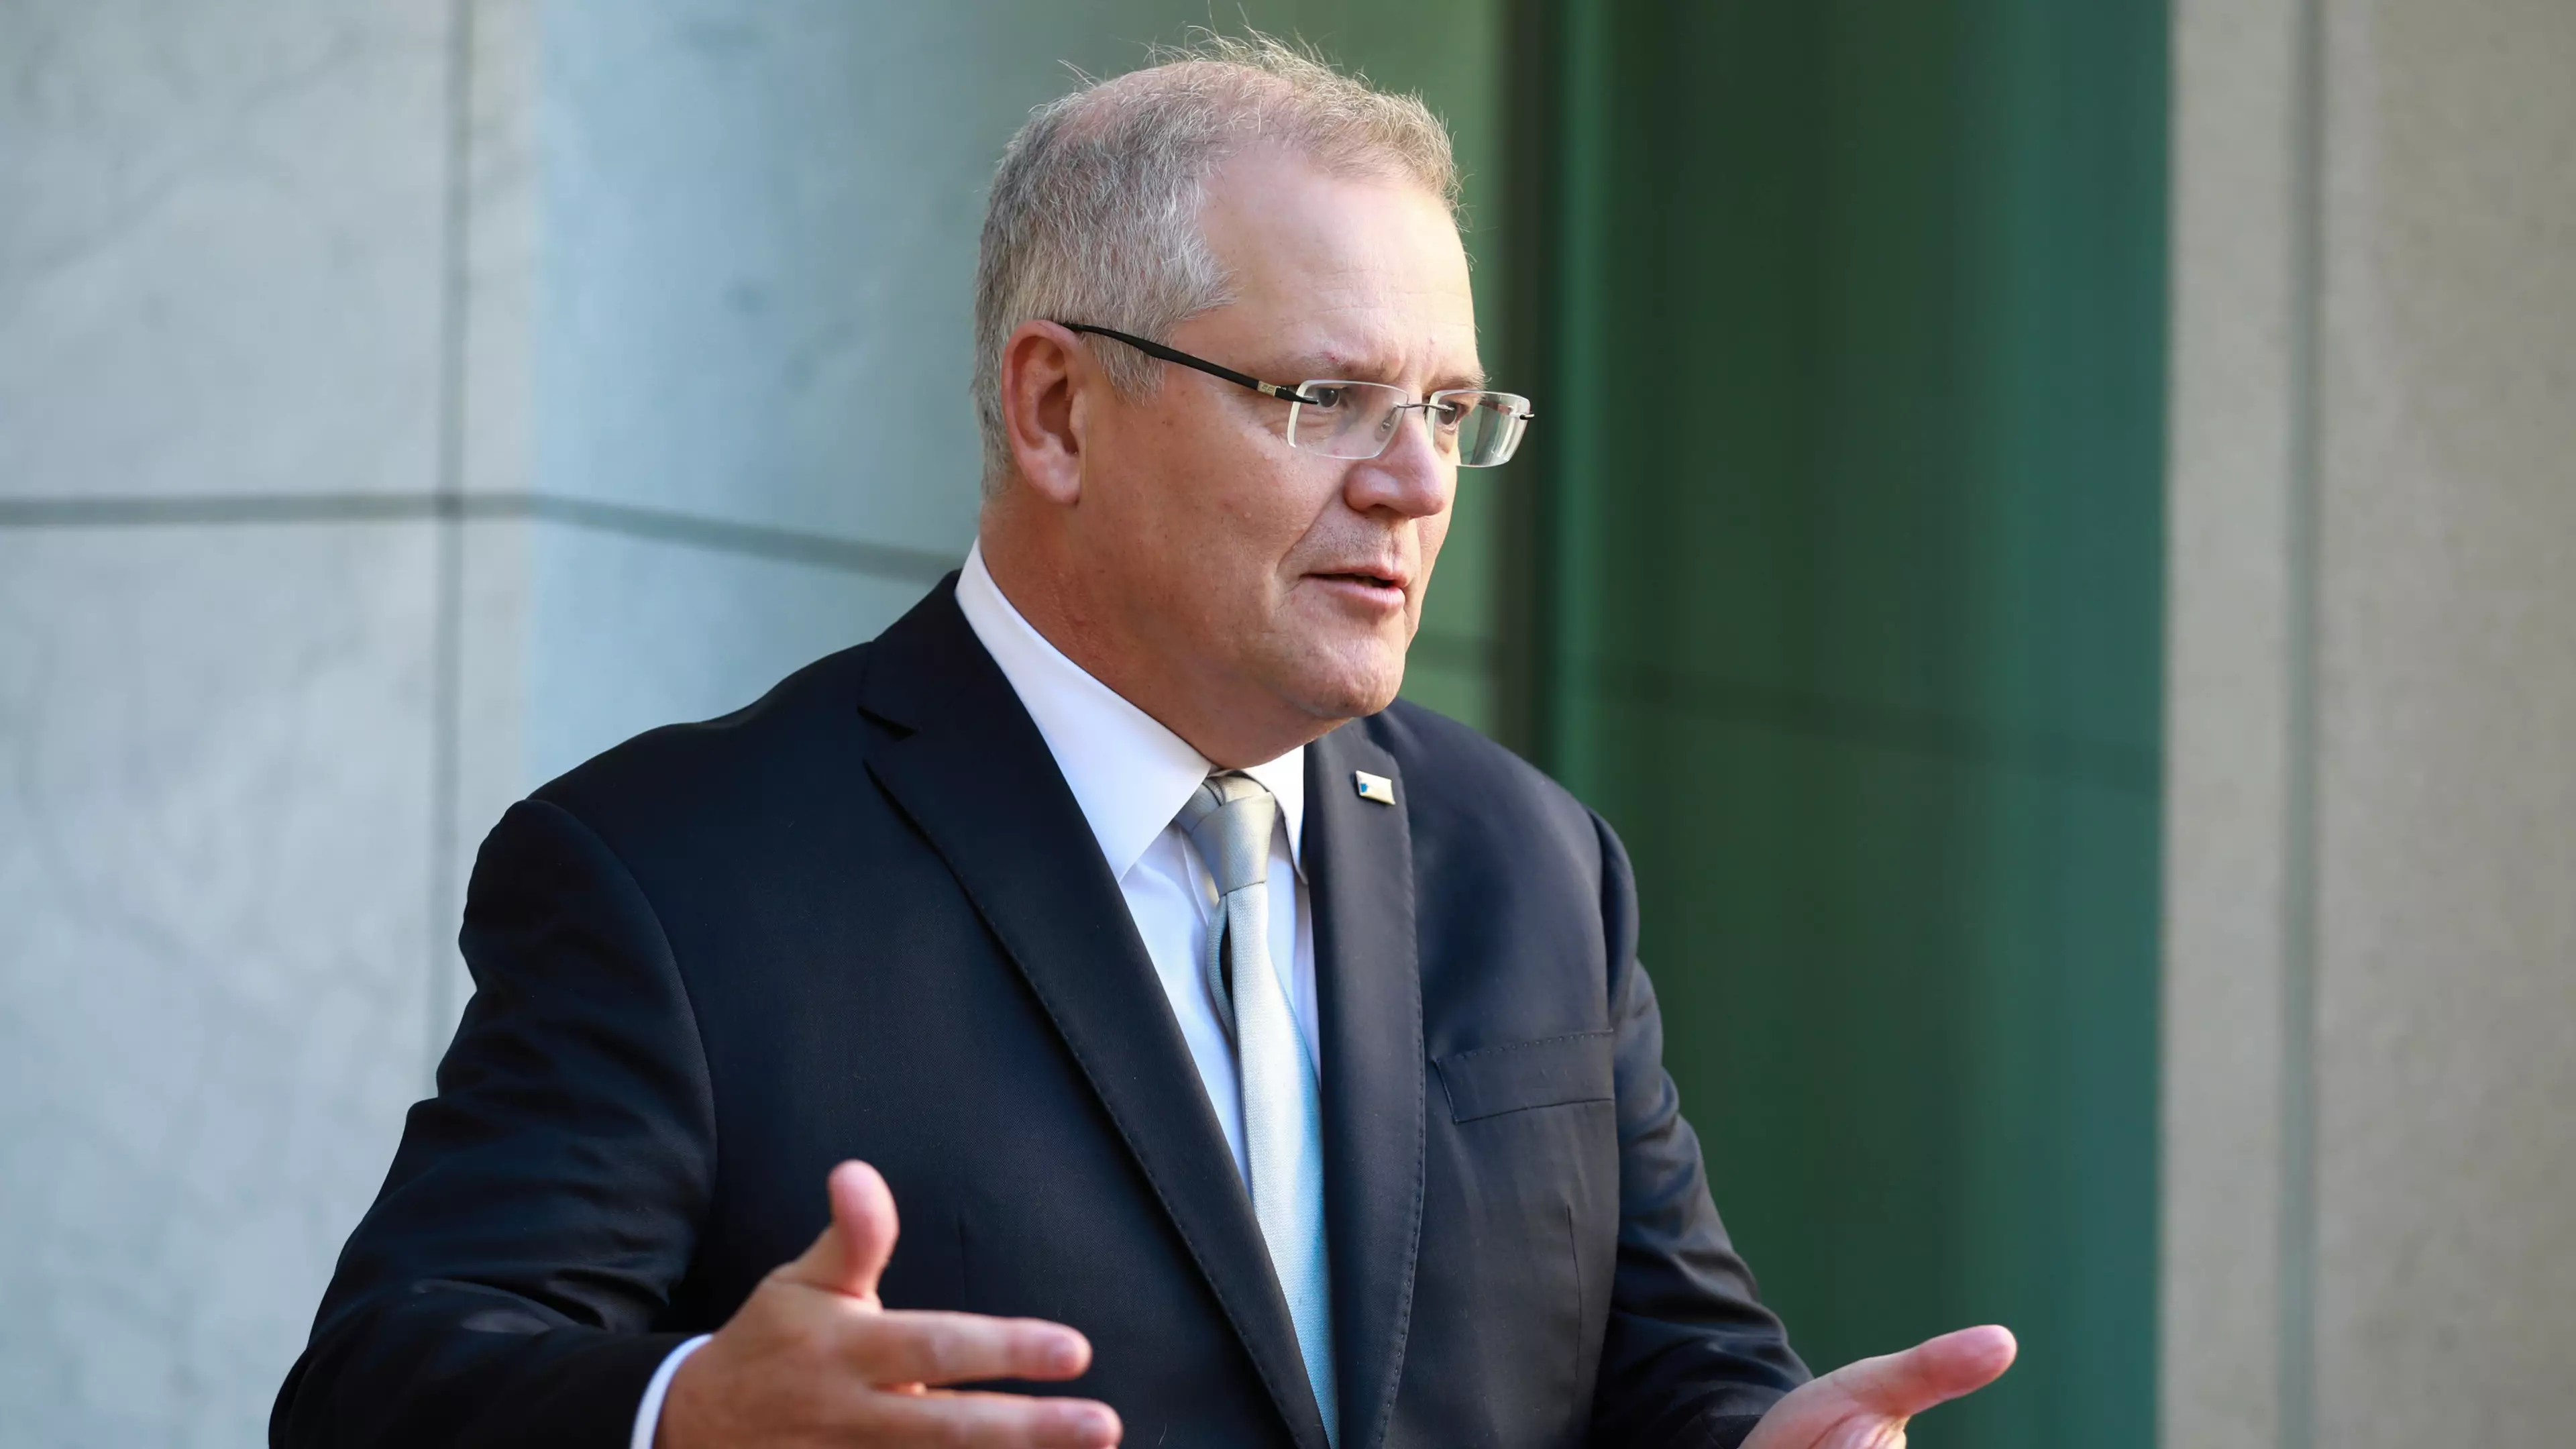 Scott Morrison Thinks It's 'Unlikely' State Border Restrictions Will Be Lifted Before Christmas